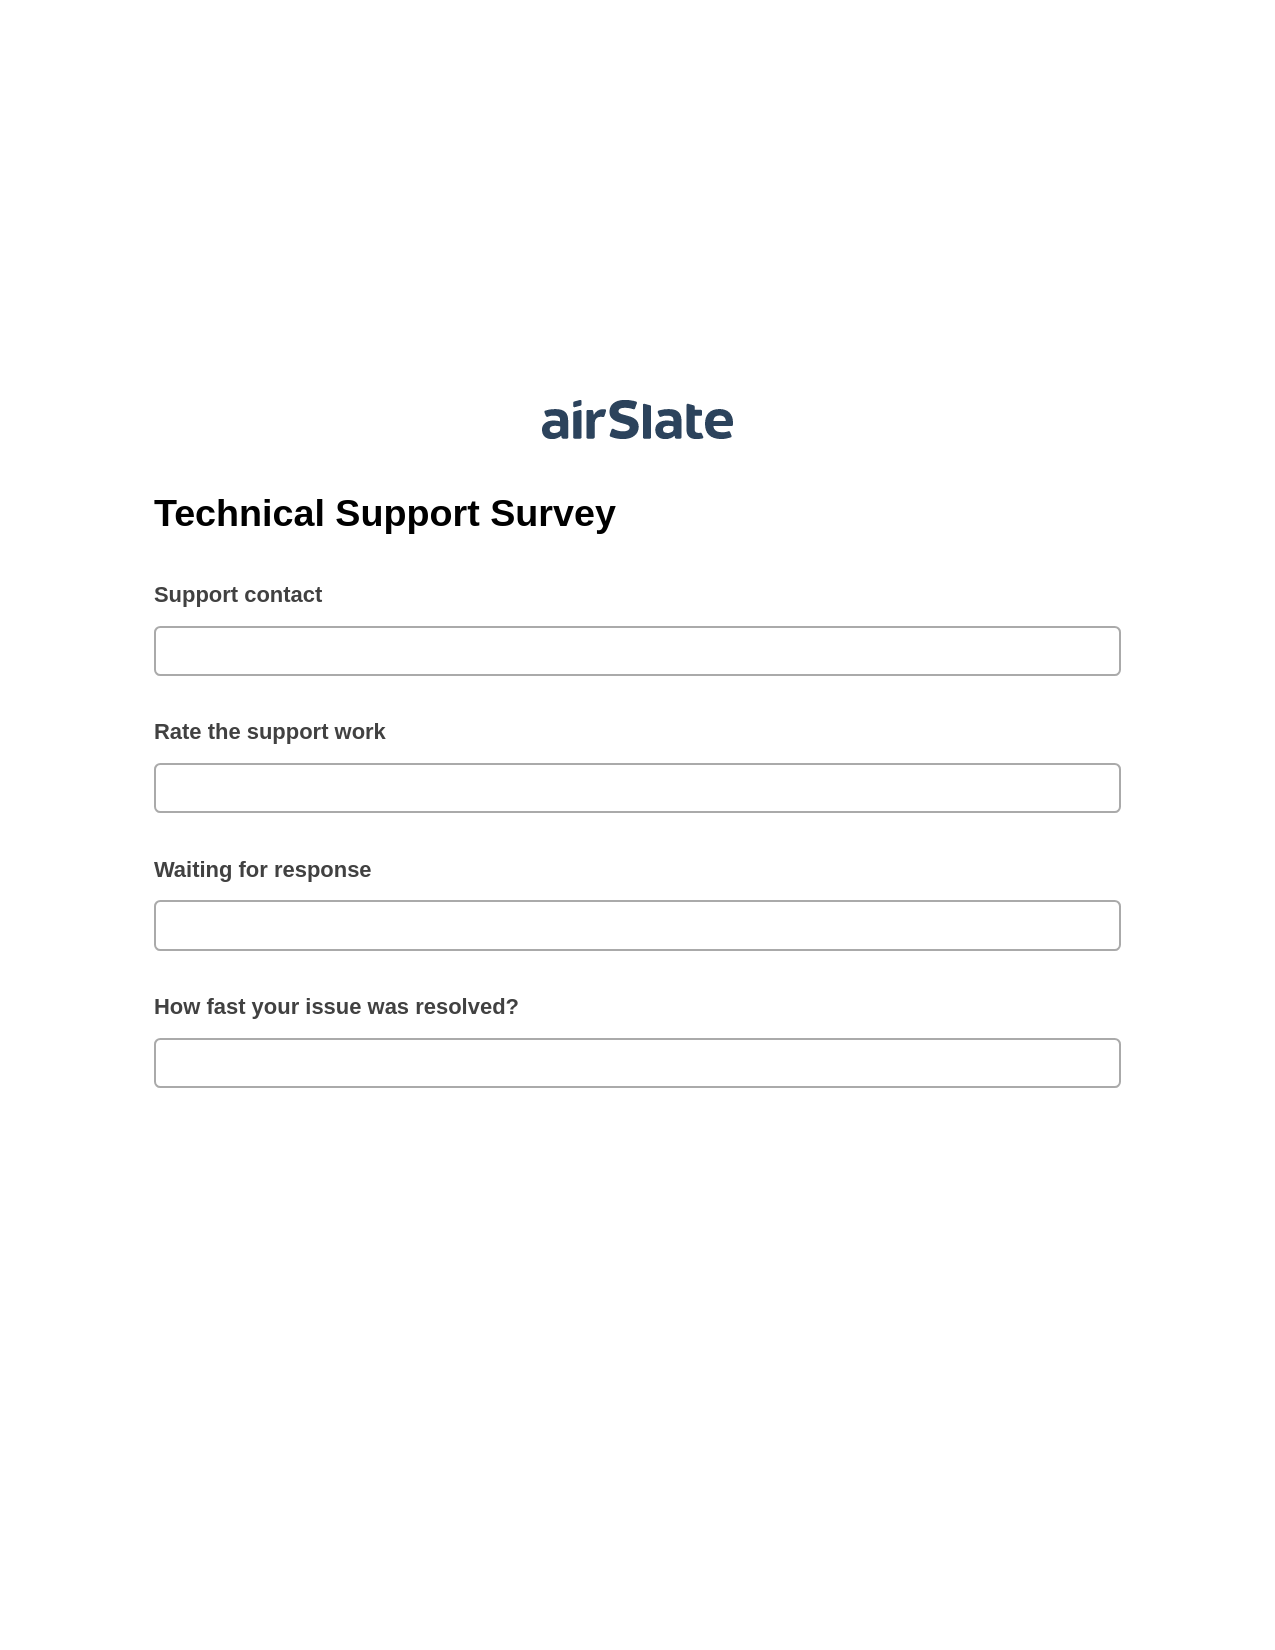 Multirole Technical Support Survey Pre-fill from Salesforce Records with SOQL Bot, Google Cloud Print Bot, Post-finish Document Bot